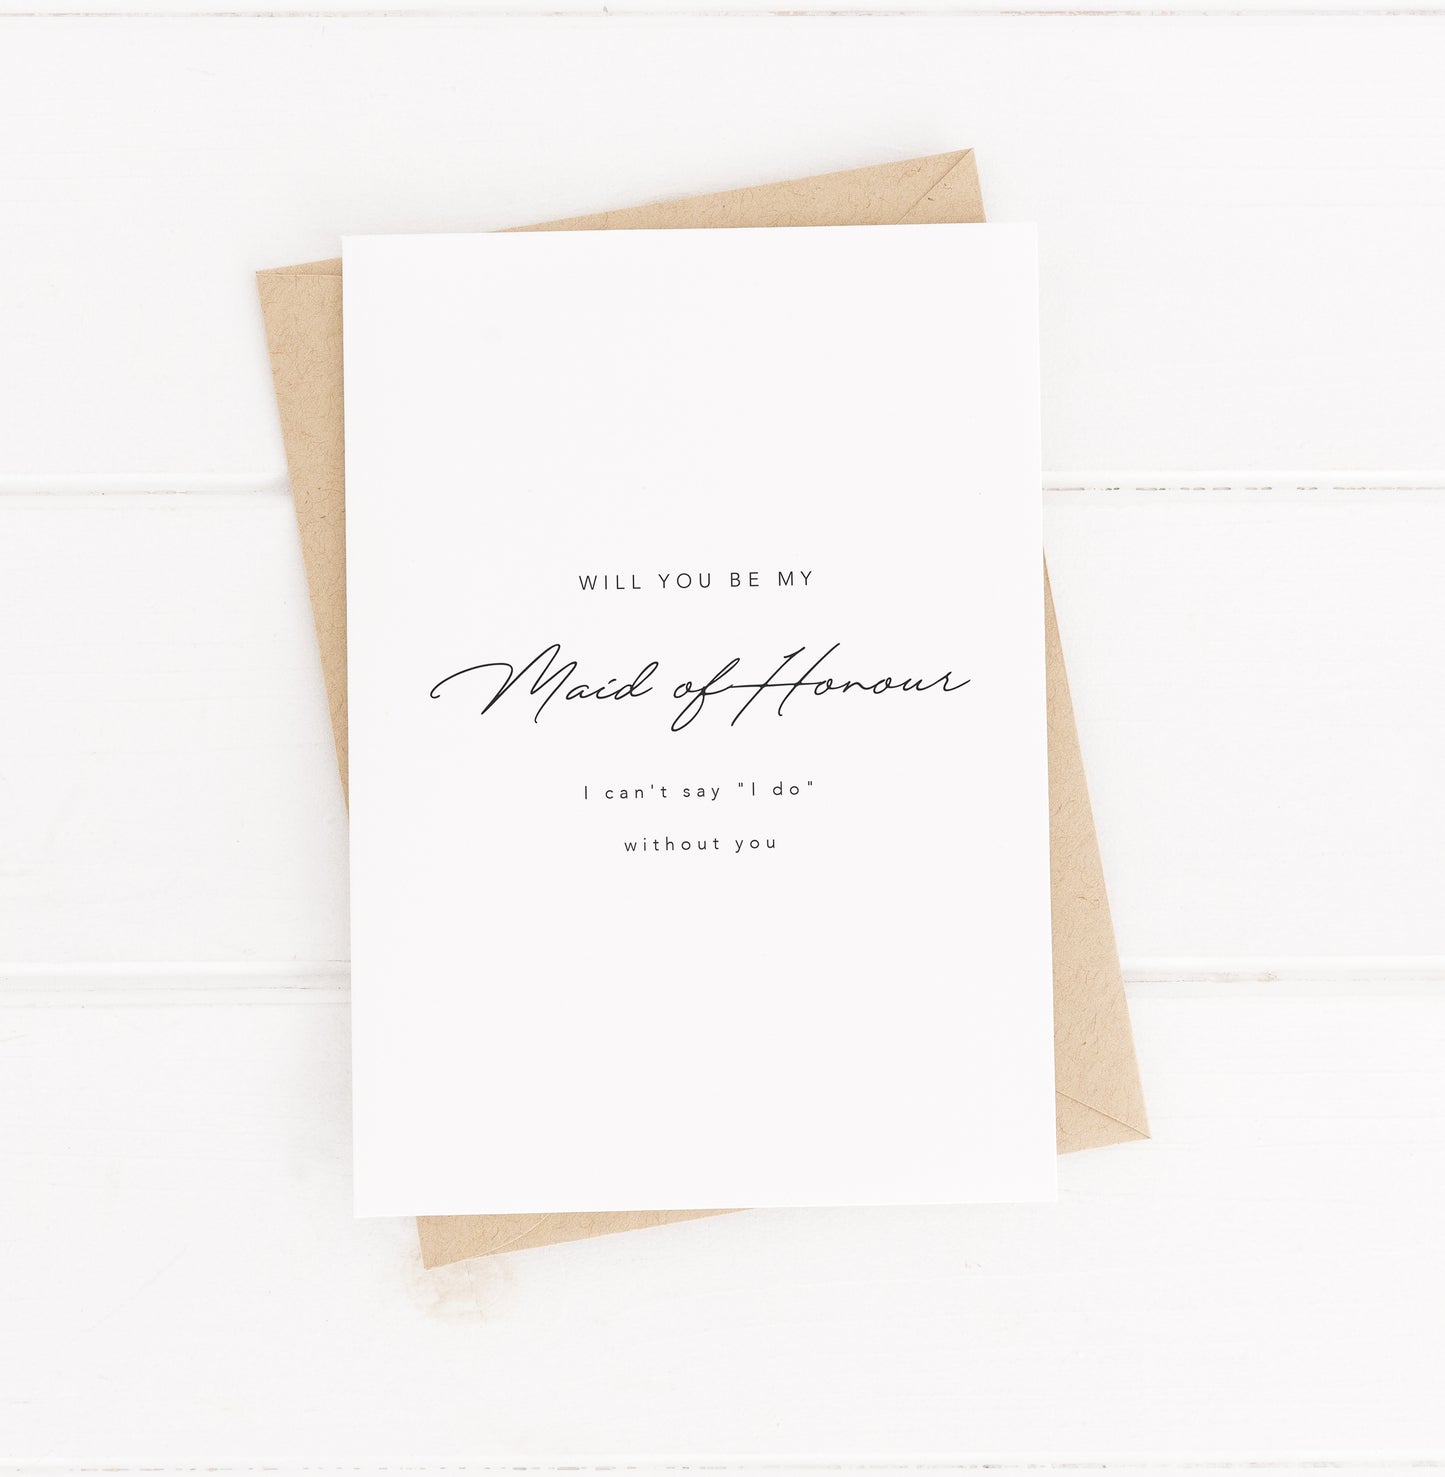 Maid of Honour bride notification card